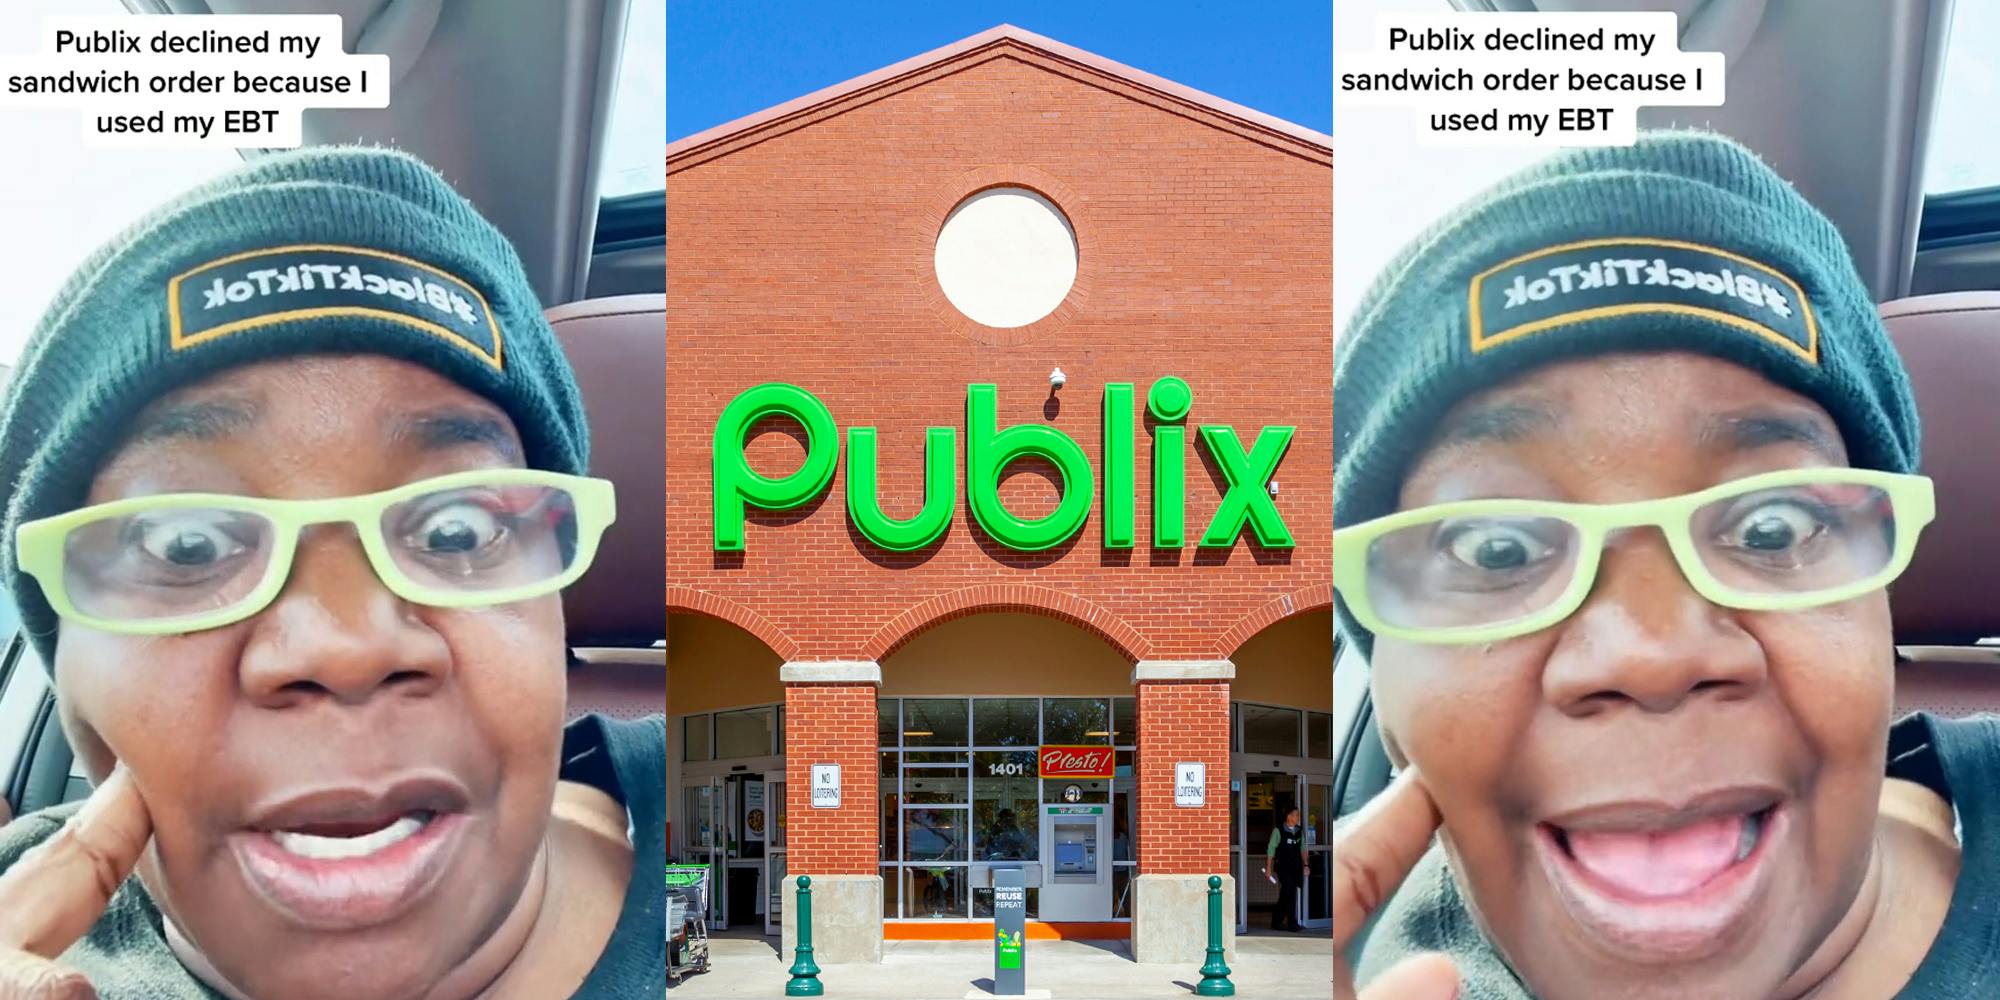 person speaking in car with caption "Publix declined my sandwich order because I used my EBT" (l) Publix sign on building (c) person speaking in car with caption "Publix declined my sandwich order because I used my EBT" (r)